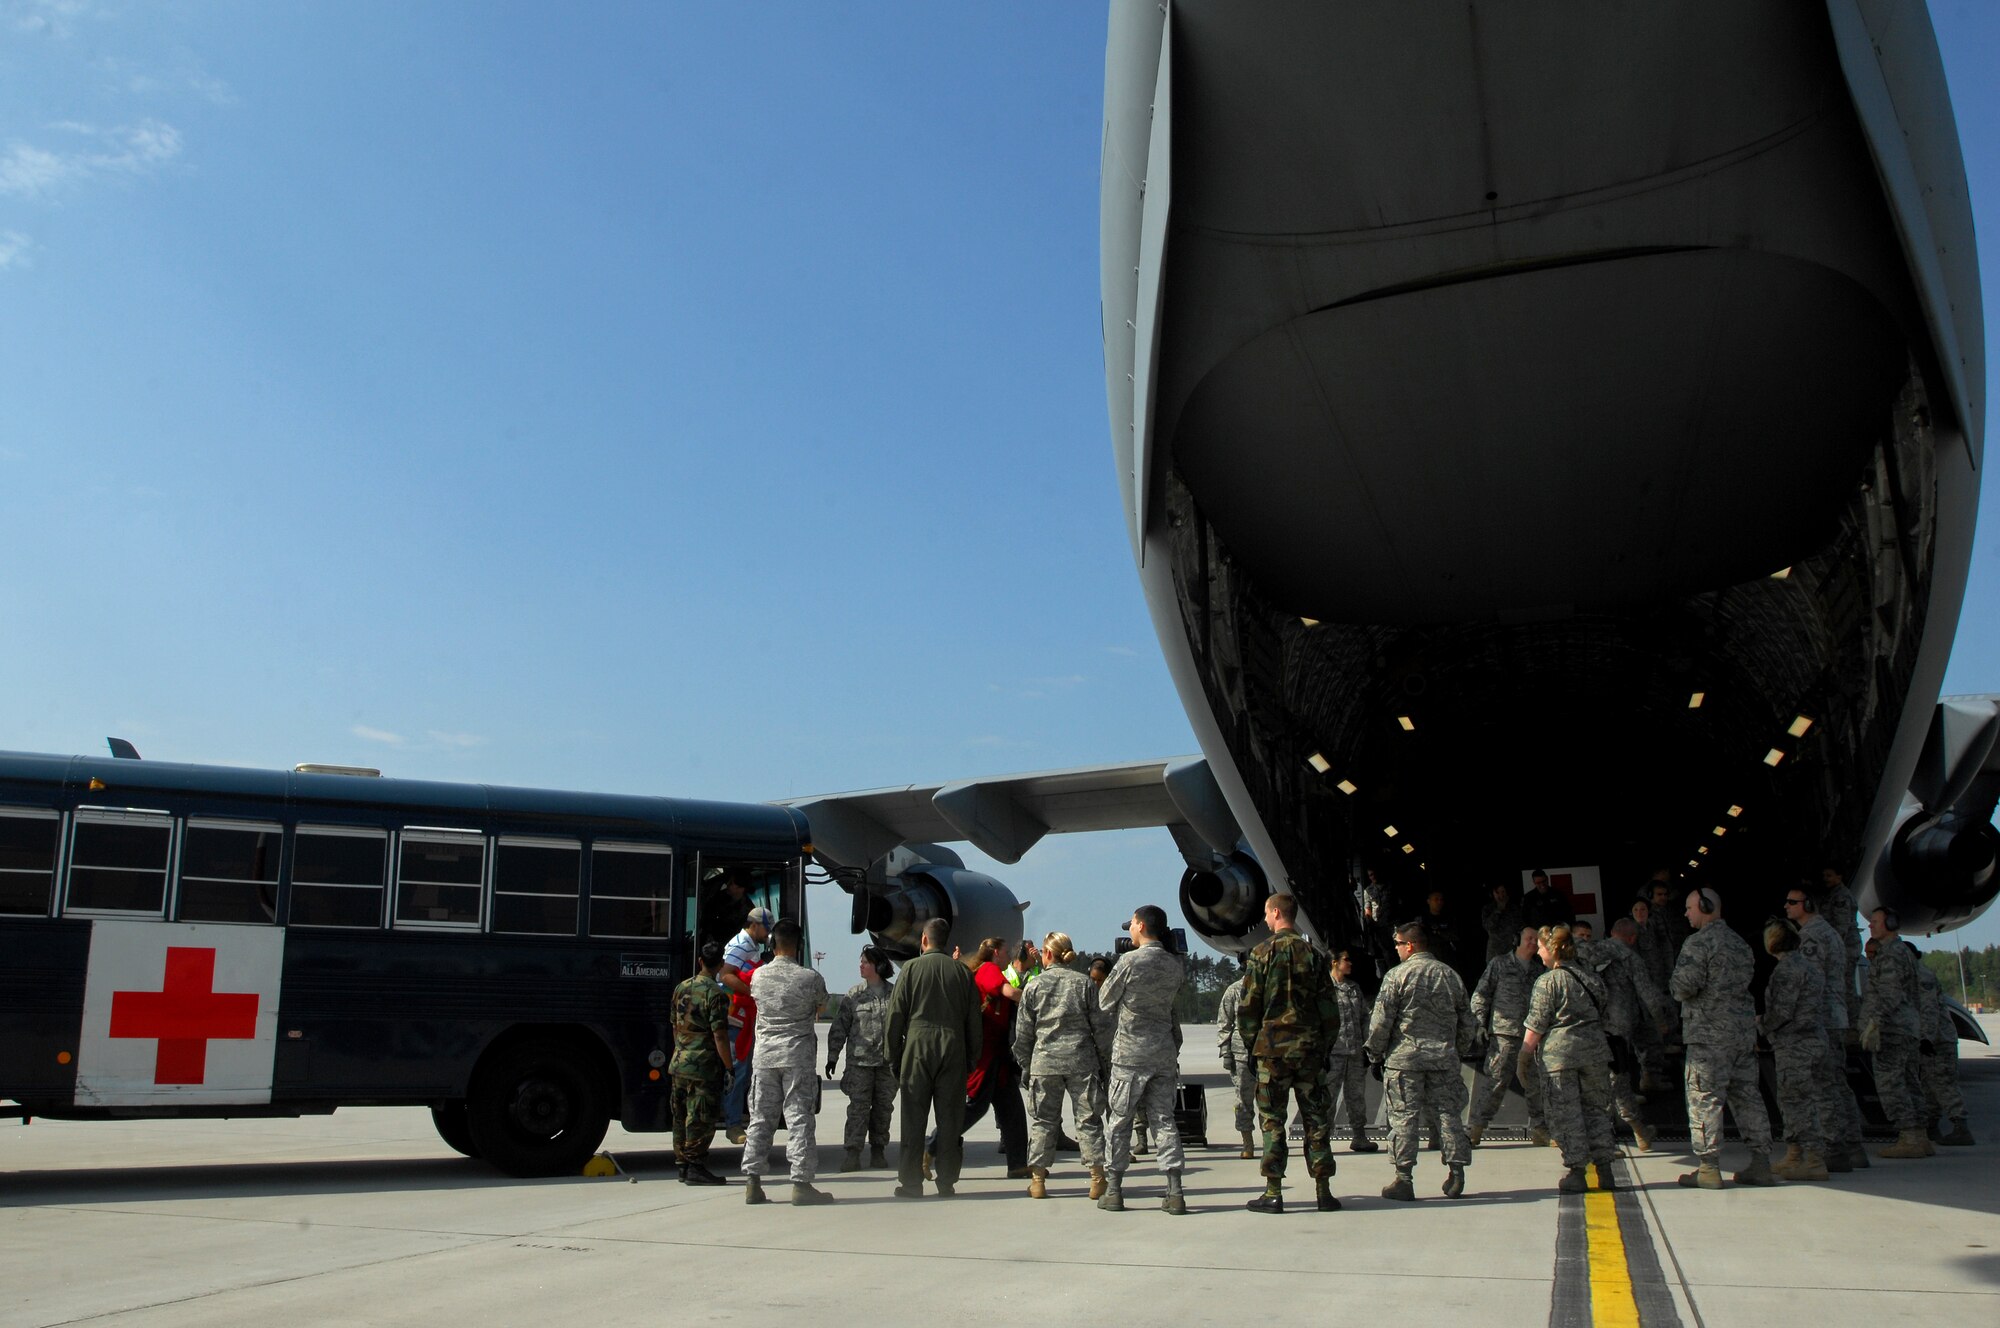 Air Force members from the 435th Aeromedical Squadron load wounded military members returning from the Area of Operation onto a C-17 Globemaster III for transport to the continental United States for further treatment. Members of the 86th Aeromedical Evacuation Squadron provided patient care for the duration of the flight. (U.S. Air Force photo by Airman 1st Class Kenny Holston)